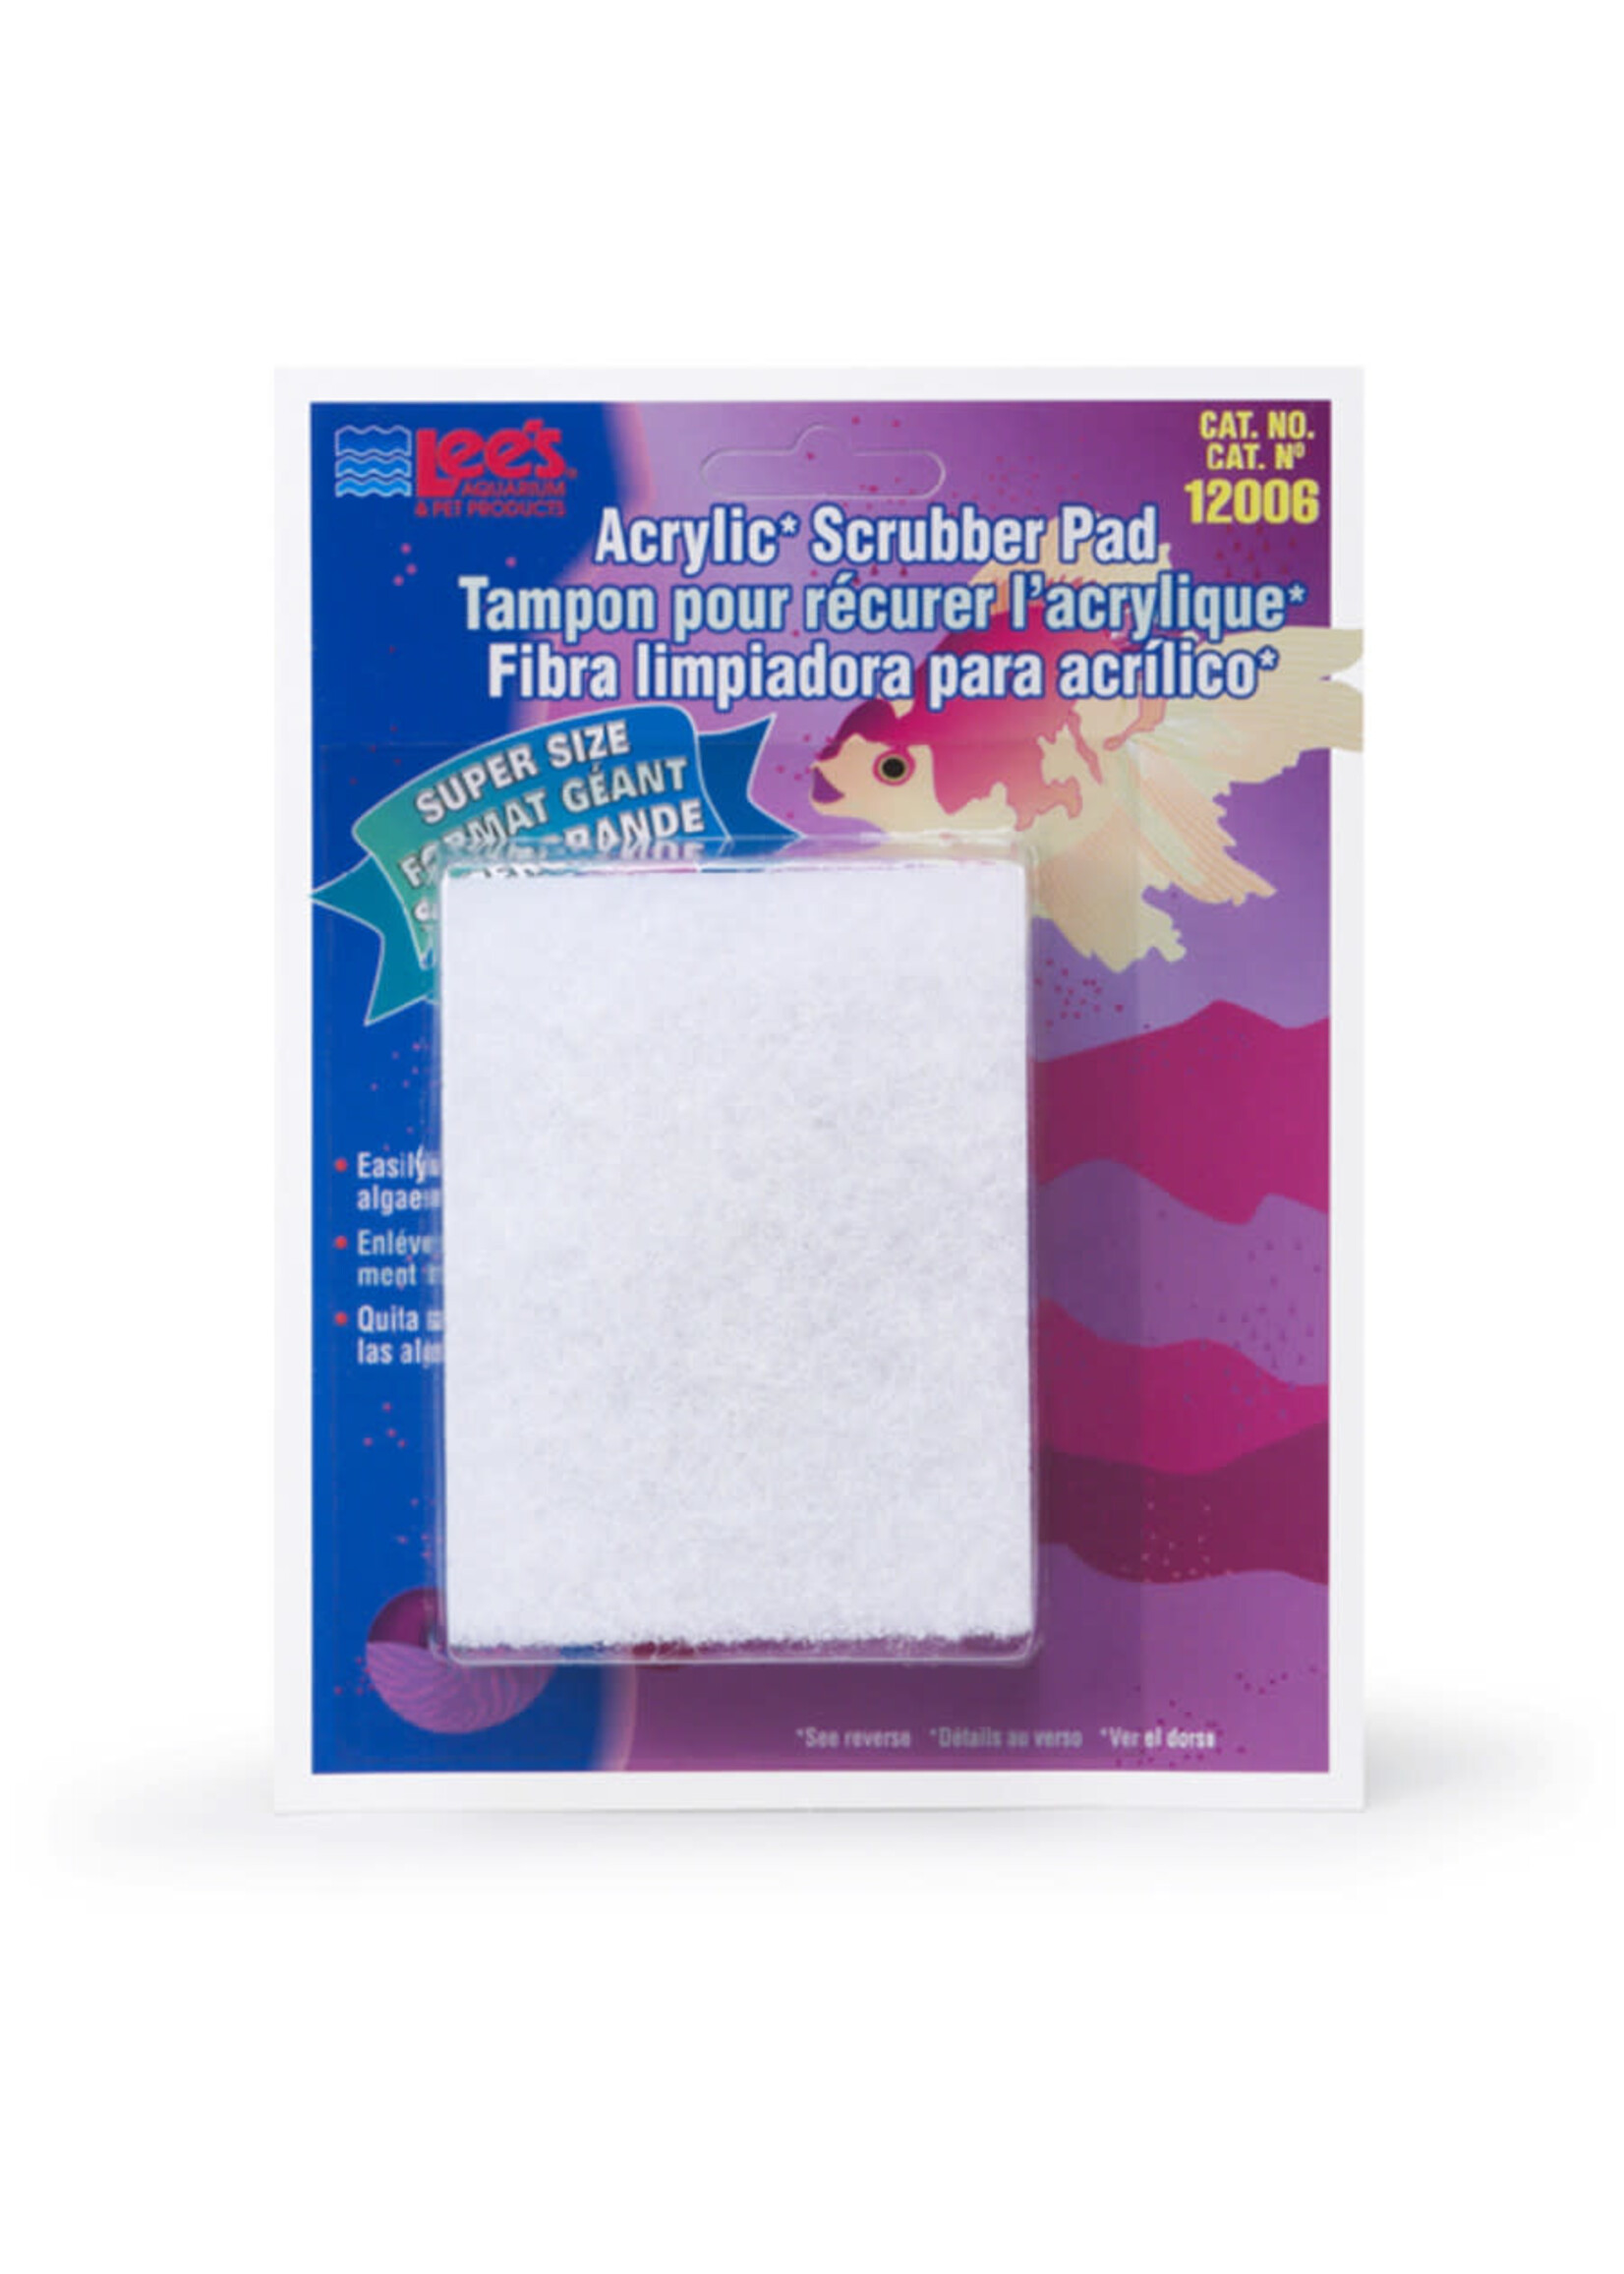 Lee's SCRUBBER PAD ACRYLIC